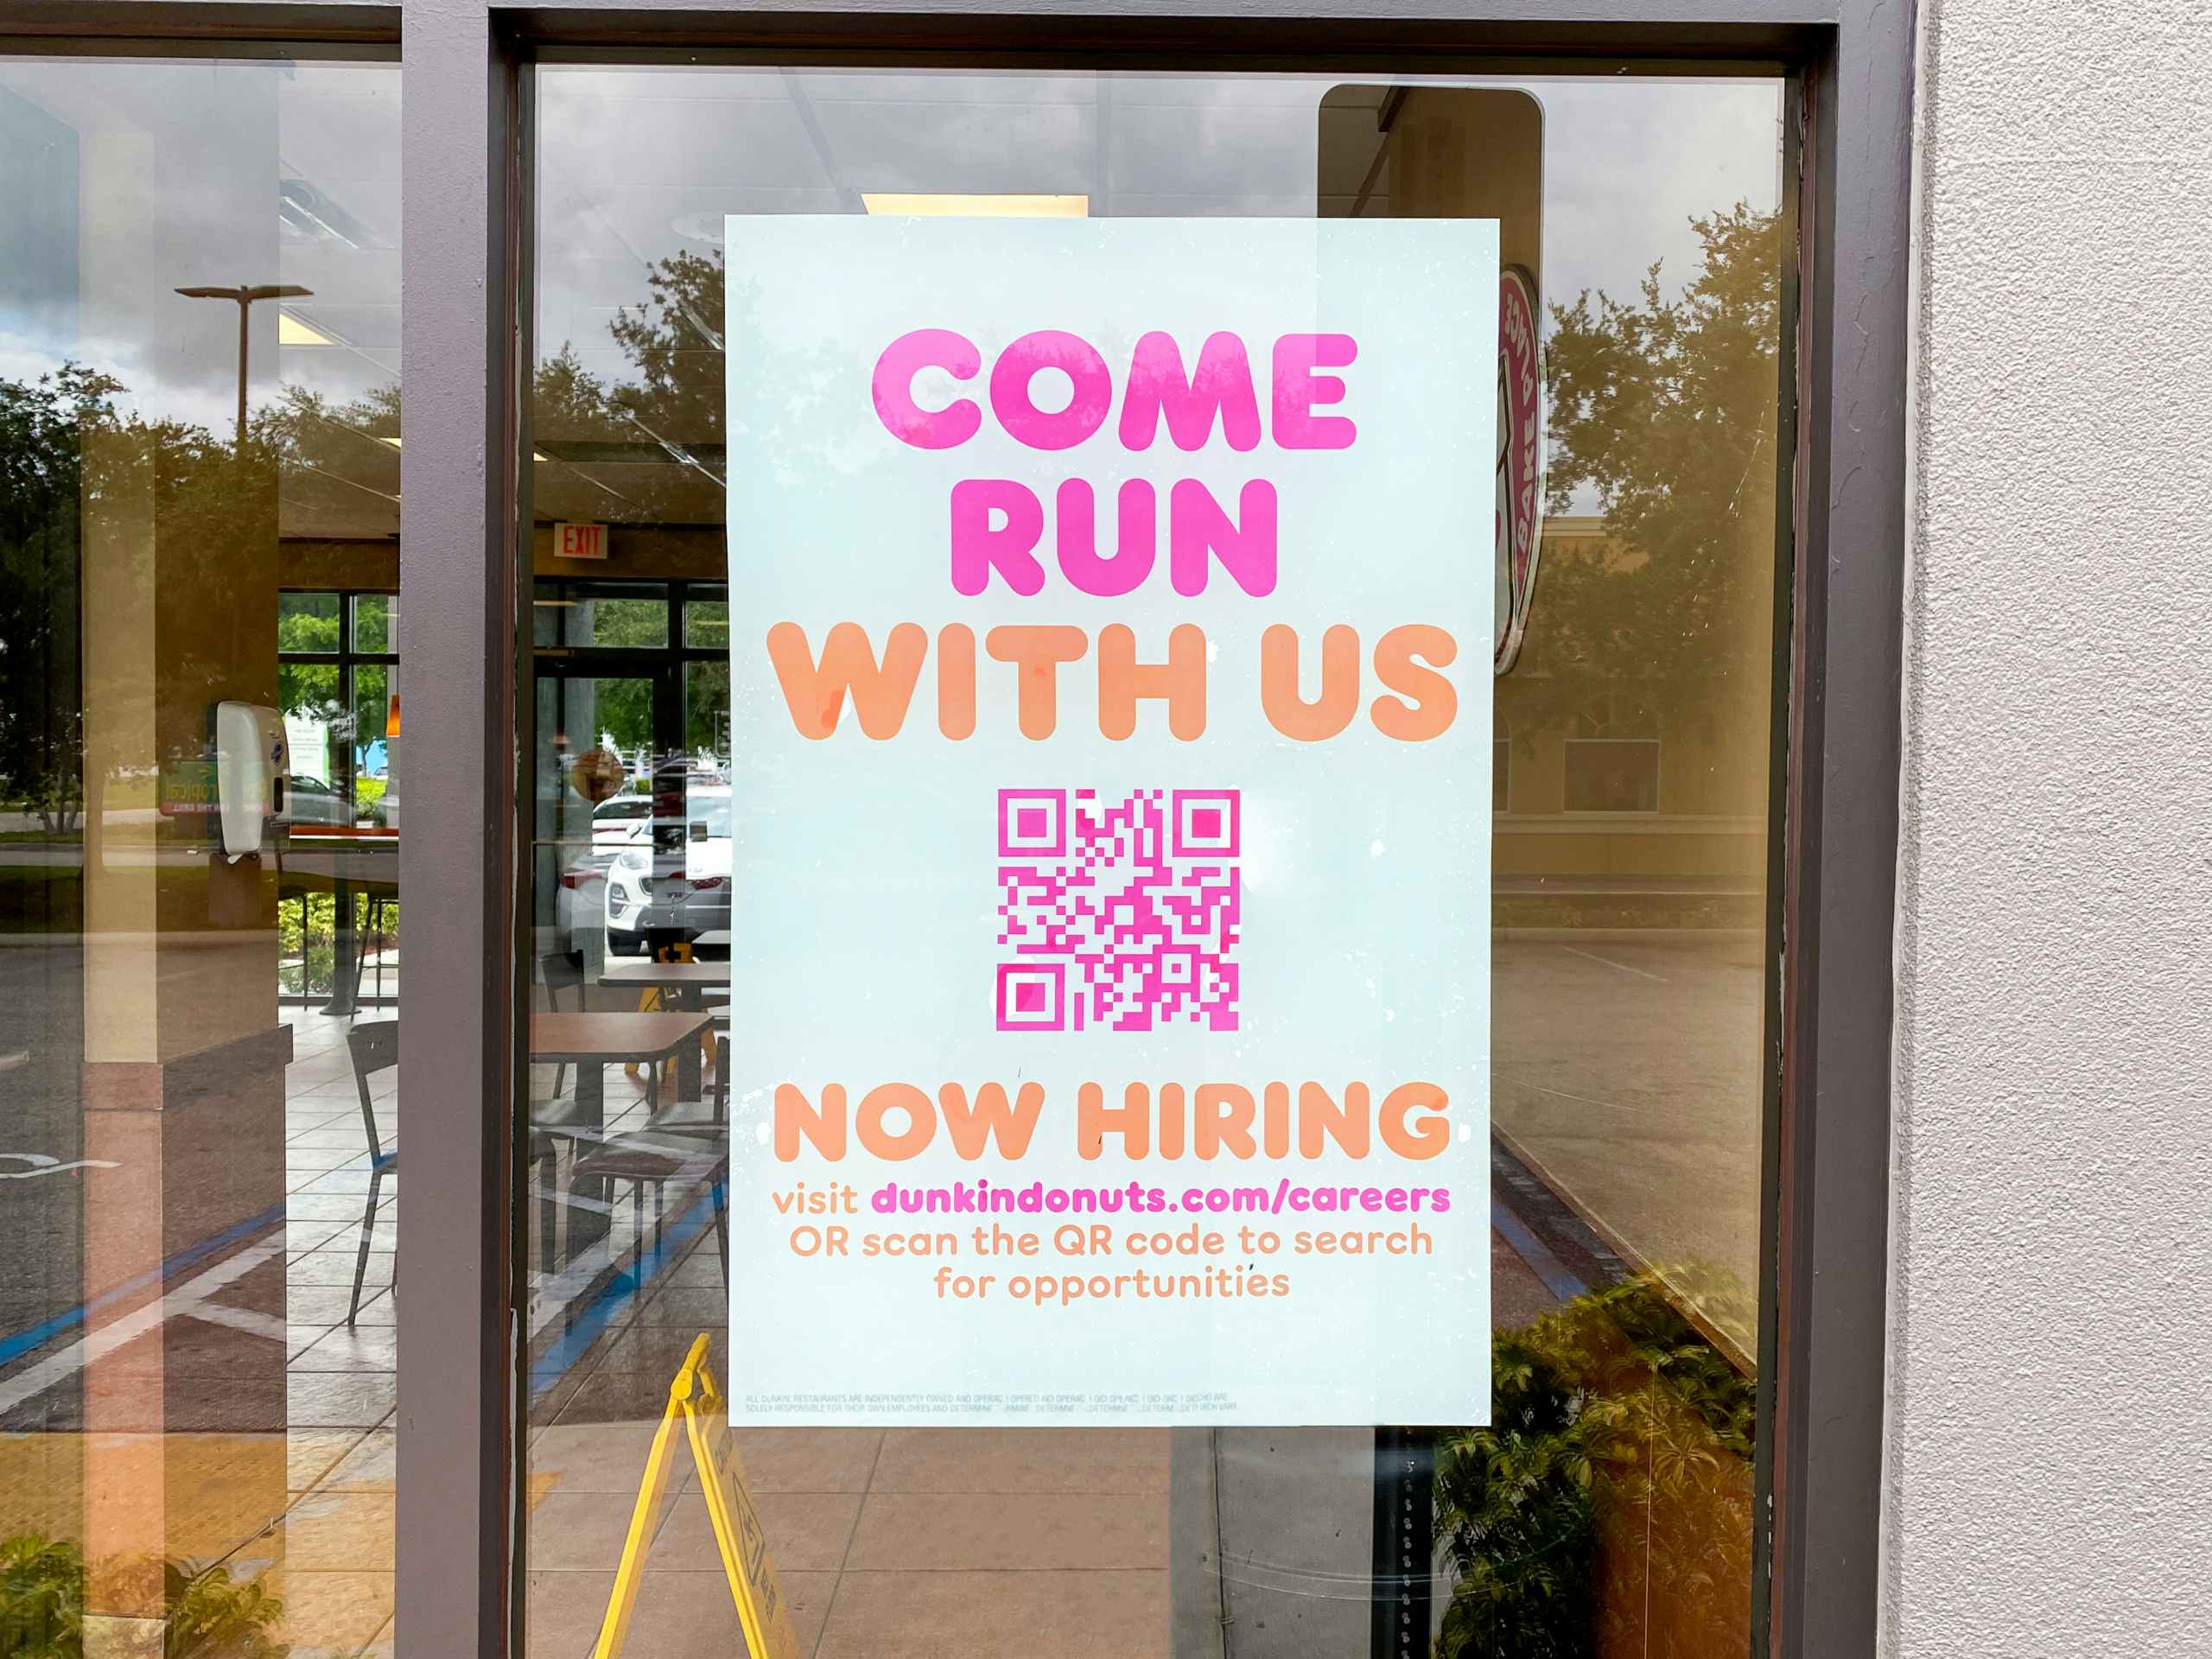 A sign in the window at Dunkin that says "Come run with us" with a QR code to apply for a position at Dunkin.